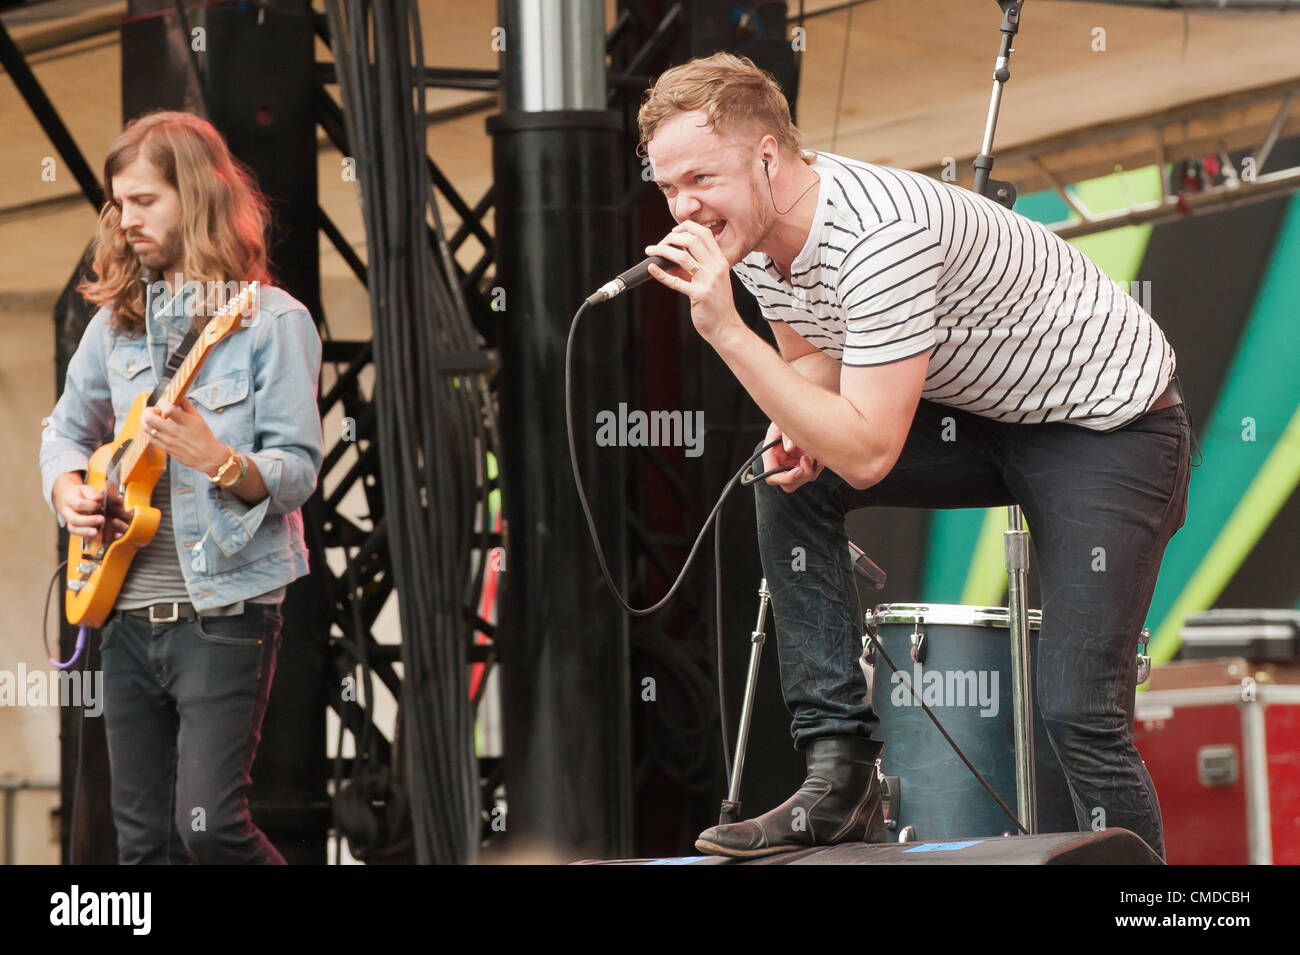 Singer / frontman Rock star / musician Dan Reynolds and Wayne Sermon of the alt rock  indie rock  indy rock band Imagine Dragons | Performing and singing at the original outdoor summer Firefly Alternative Music Festival in 2012 by Red Frog Events | concert venue located in Dover, Delaware, United States Stock Photo